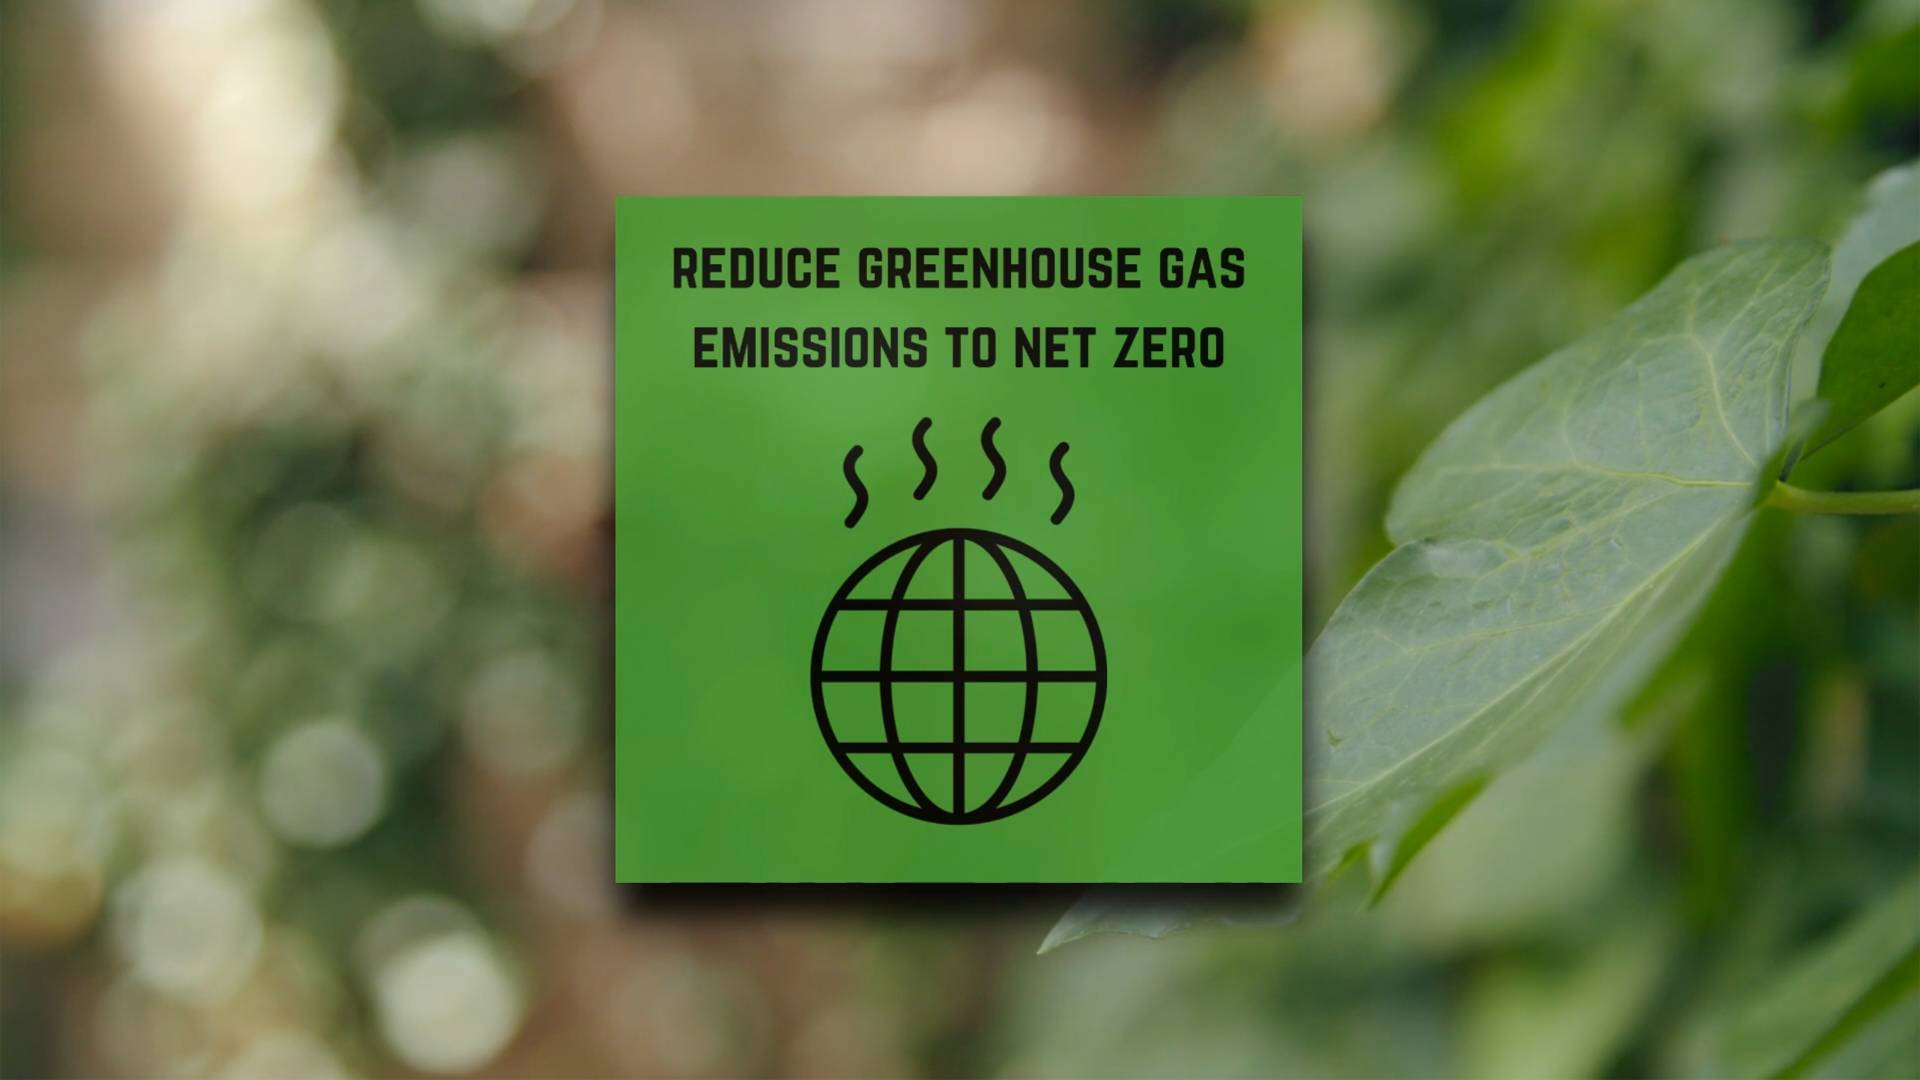 Reducing greenhouse gas emissions to net zero